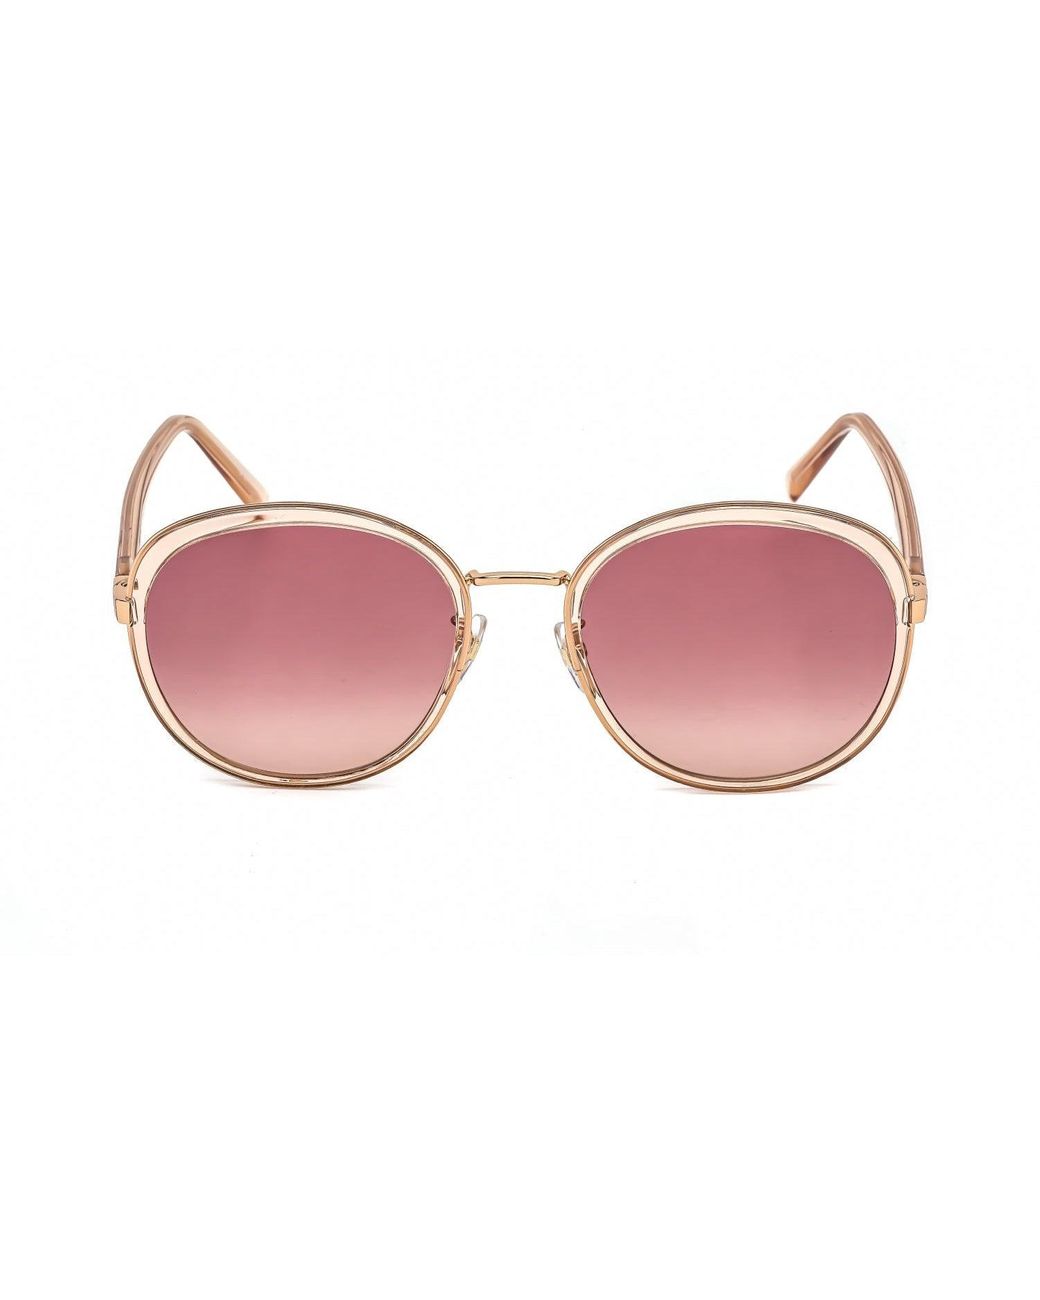 Givenchy Tinted Oversized Sunglasses in Metallic Womens Sunglasses Givenchy Sunglasses Natural 